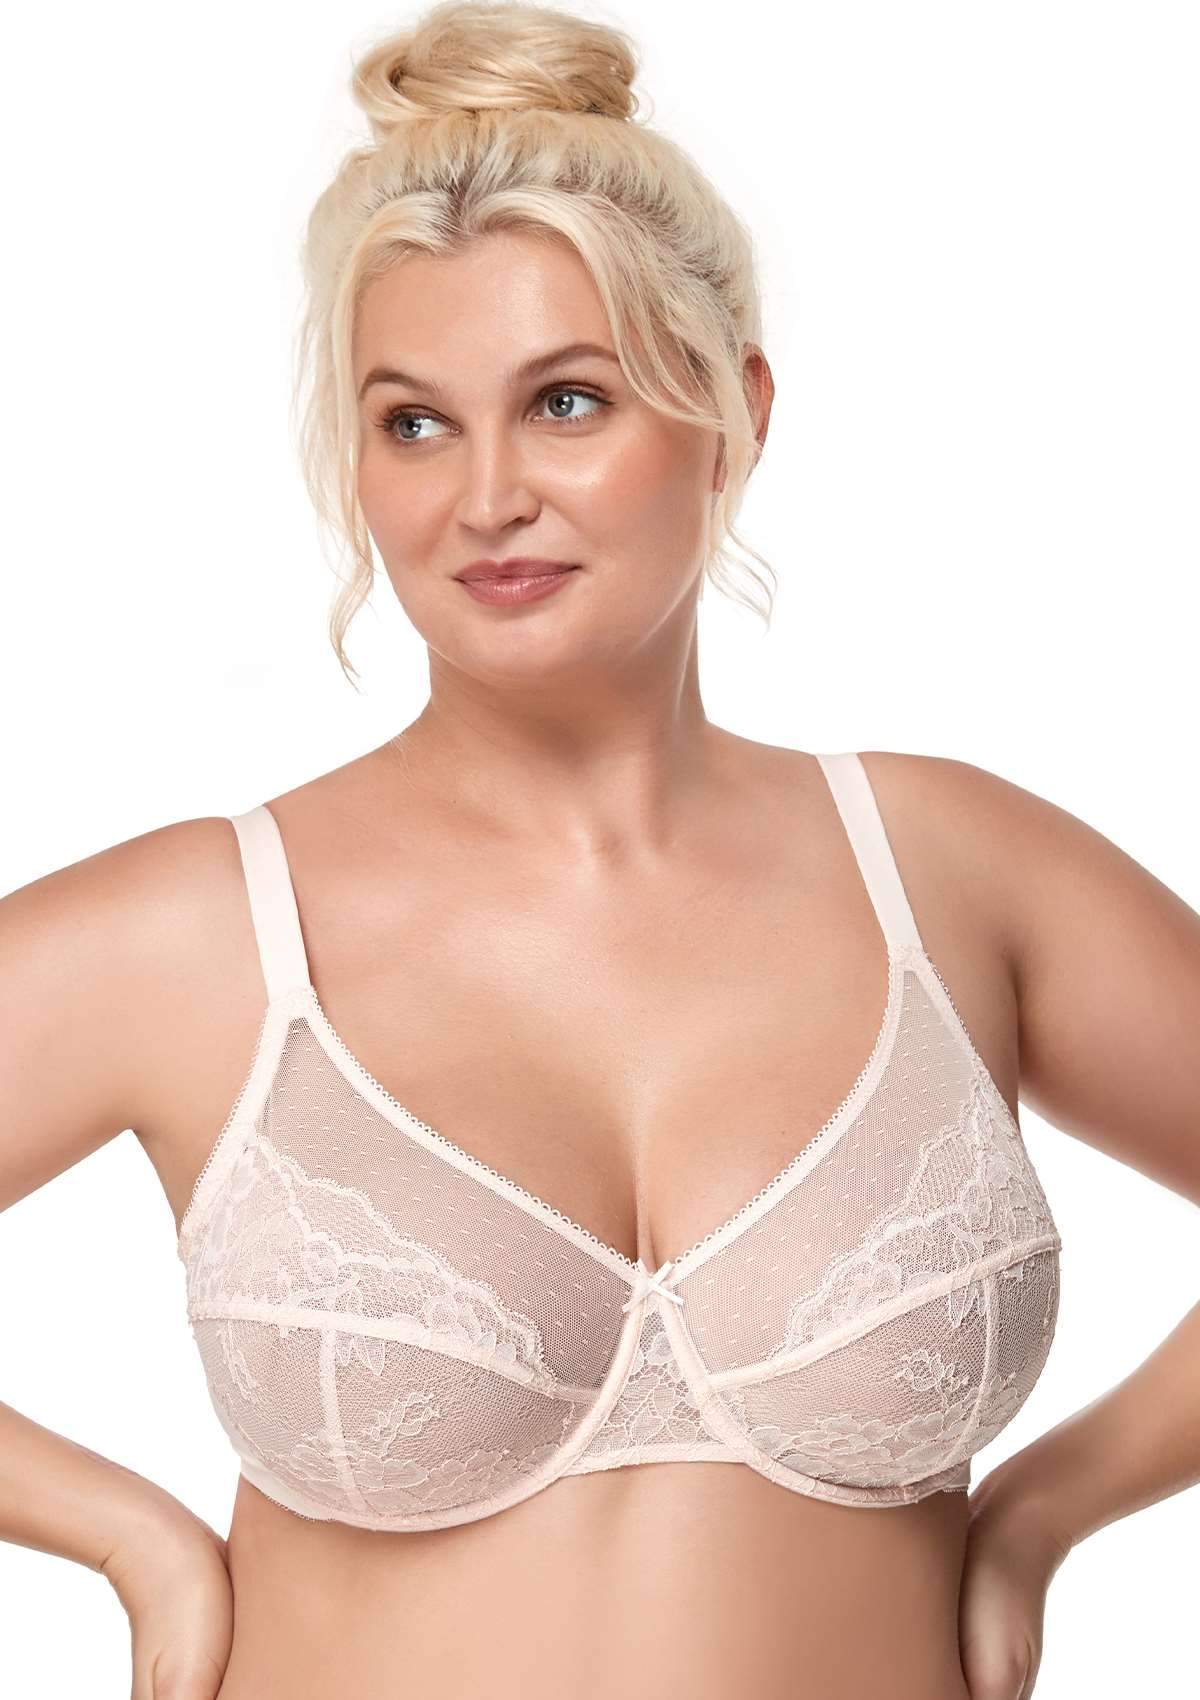 HSIA Enchante Lacy Bra: Comfy Sheer Lace Bra With Lift - Dusty Peach / 44 / D